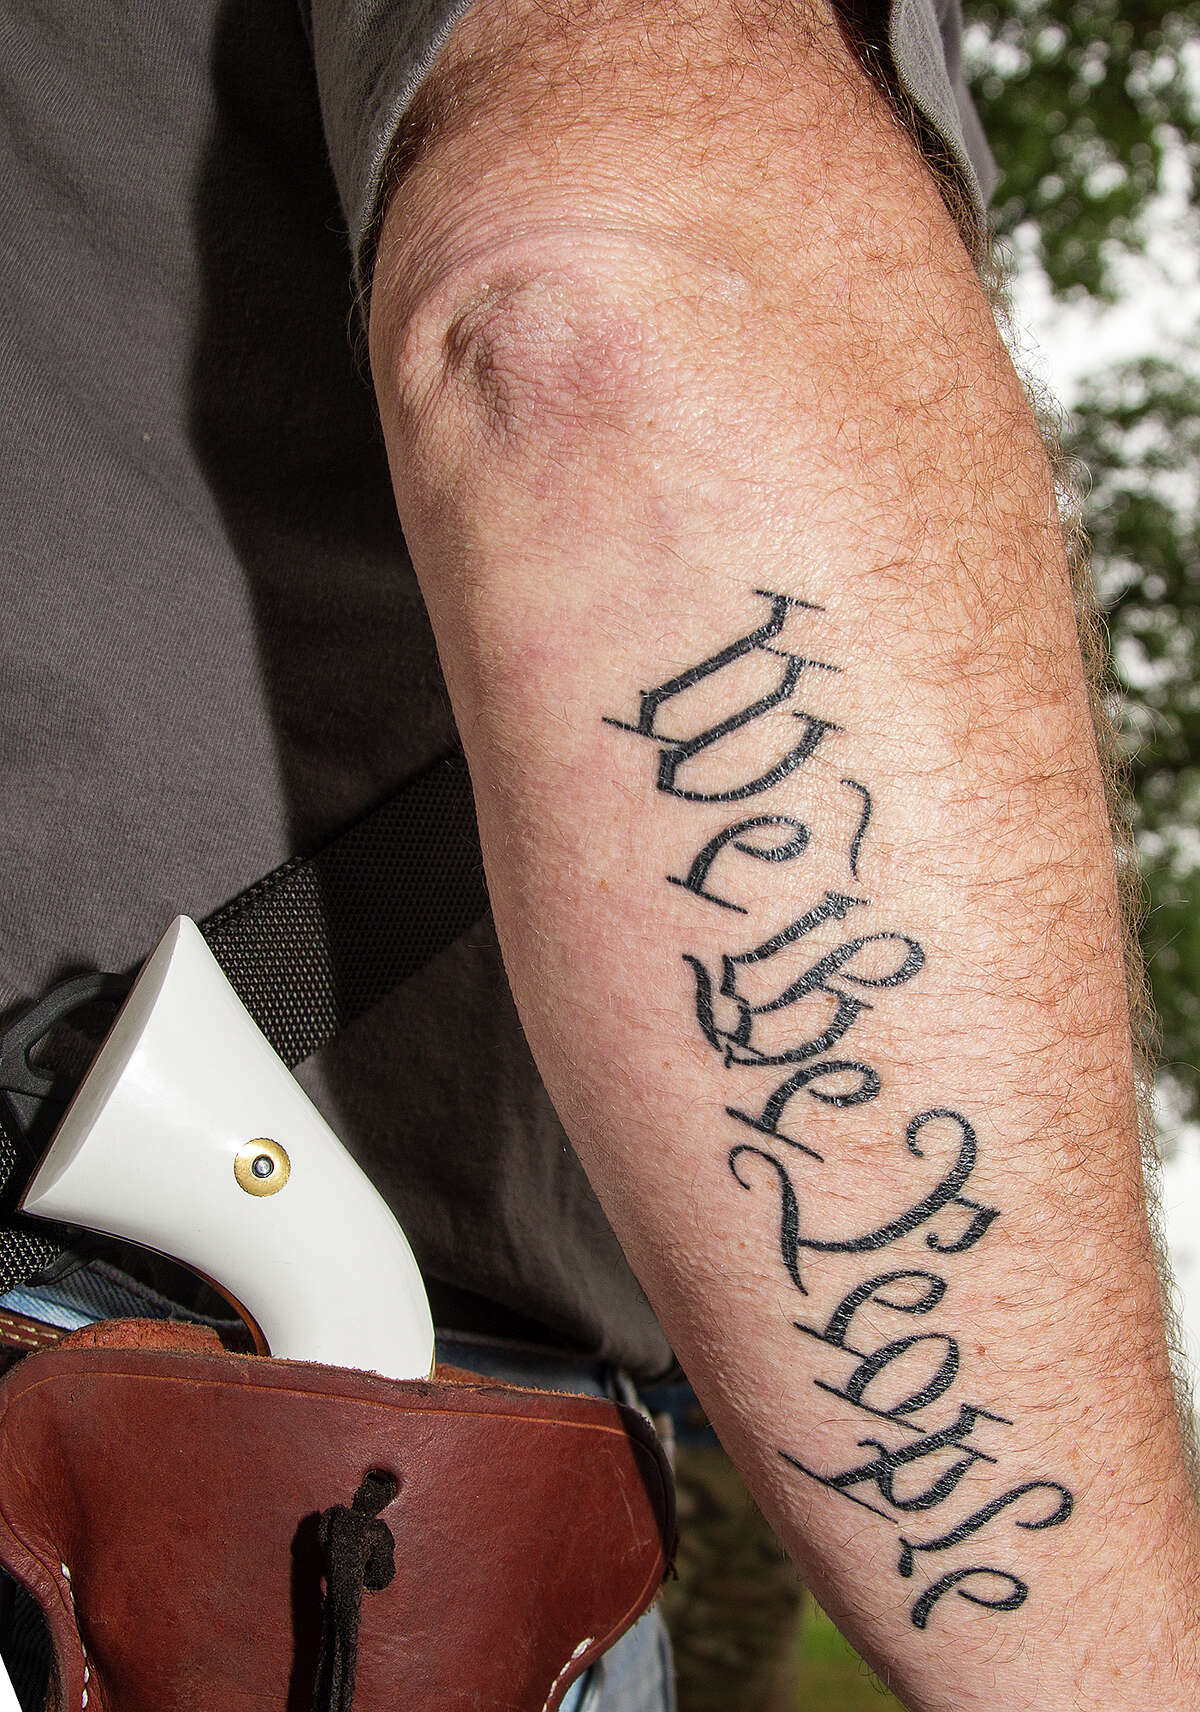 Tattoo found on an arm at an Open Carry Texas rally in support of Henry Vichique, Sunday, April 6, 2014, at the San Antonio Police Department West Substation. 19 year-old Vichique was tased and arrested on March 31, 2014 while walking home with a loaded rifle.